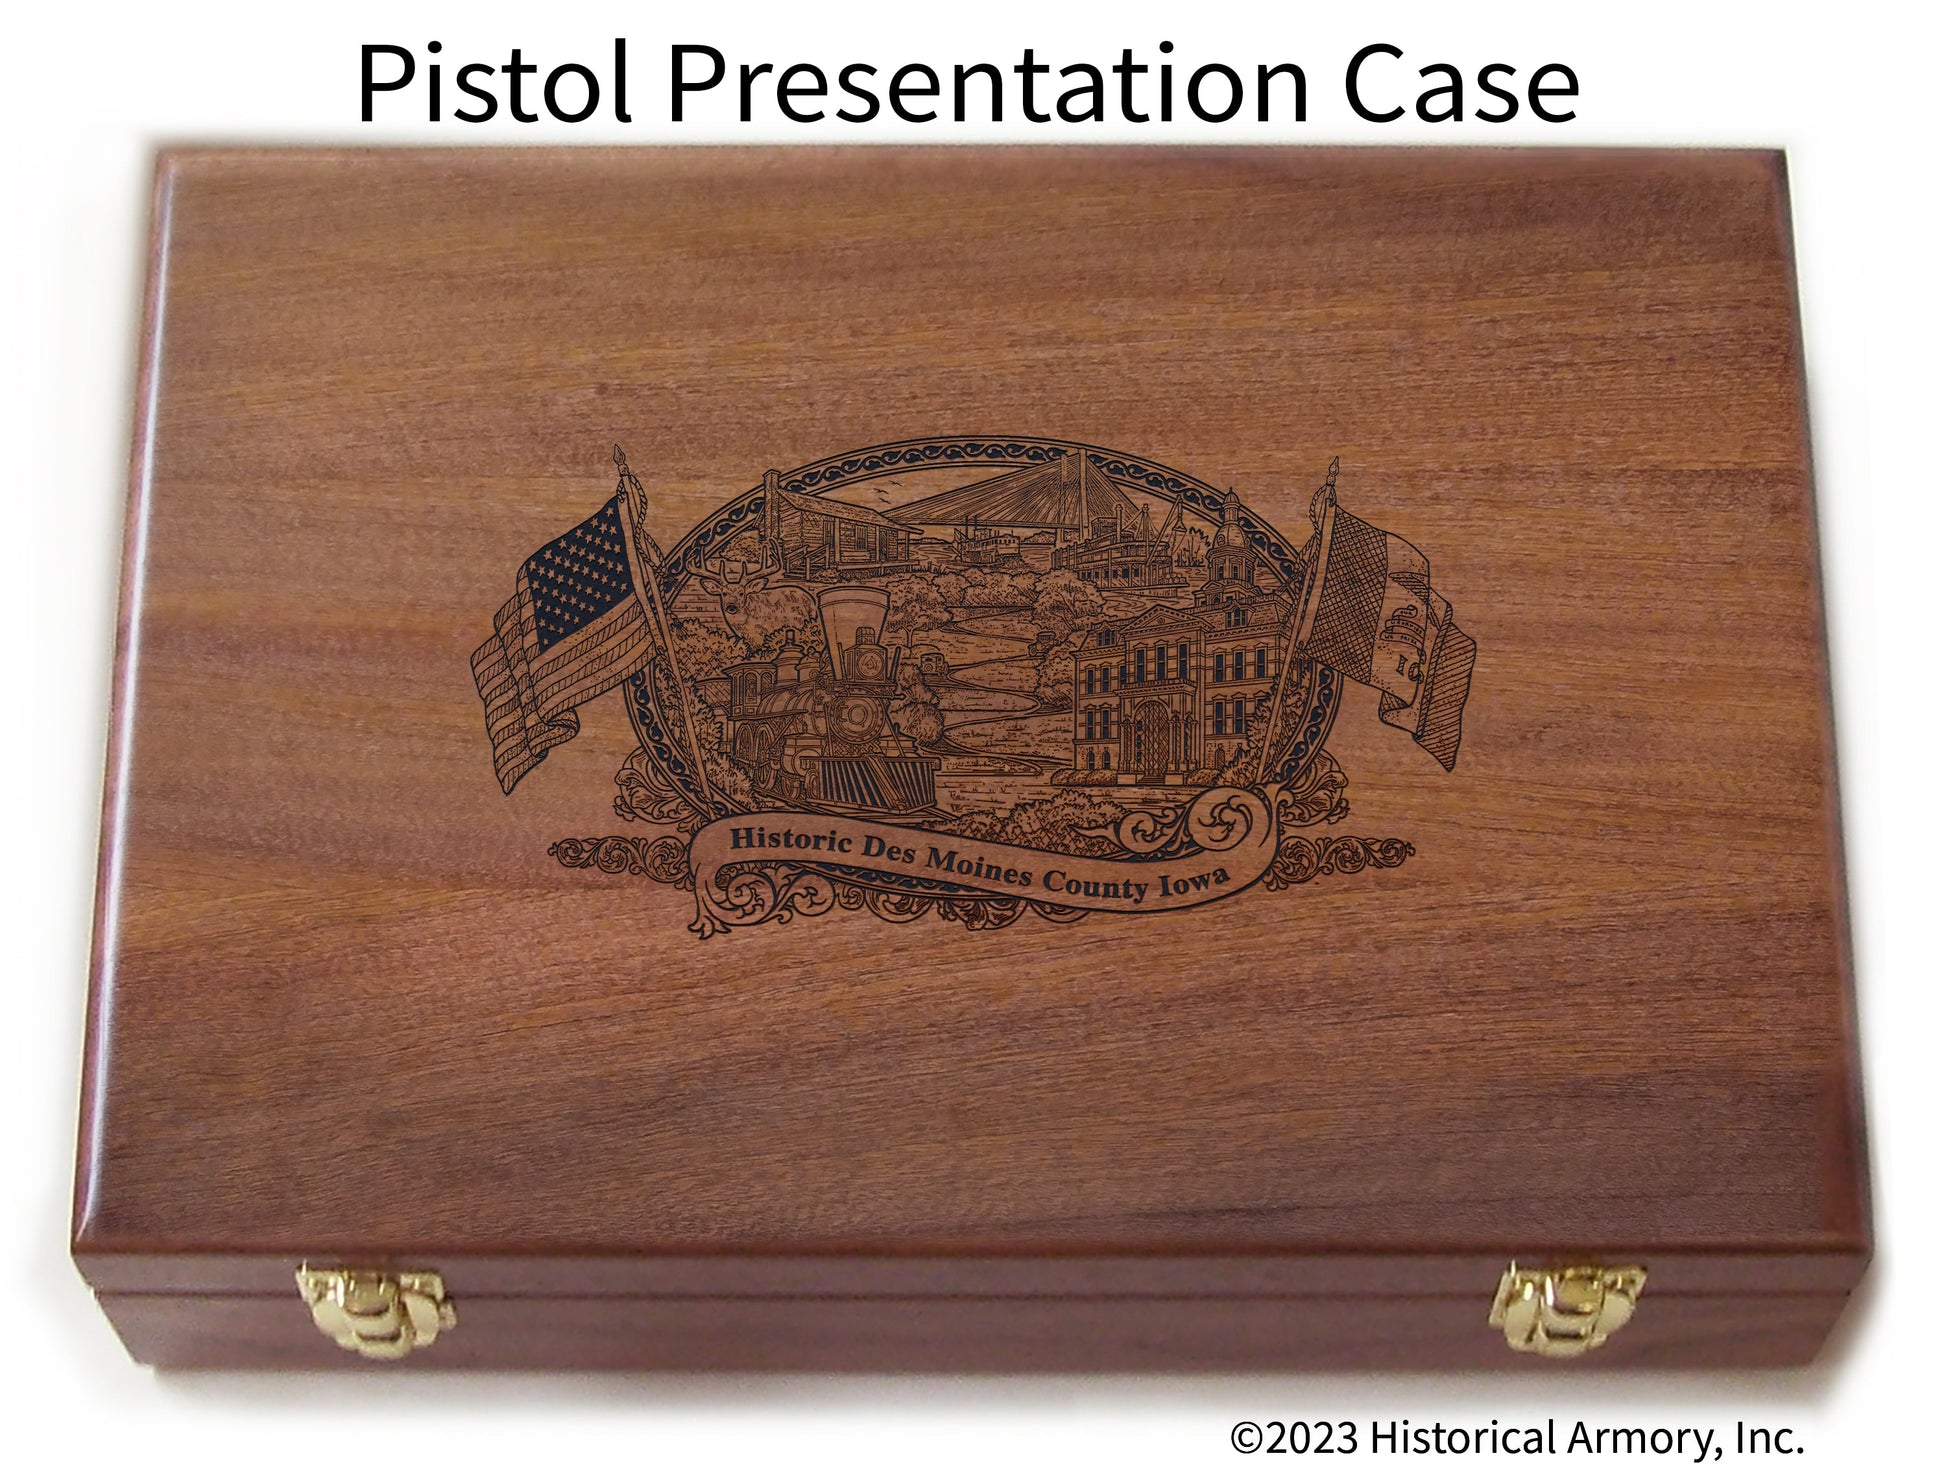 Des Moines County Iowa Engraved .45 Auto Ruger 1911 Presentation Case